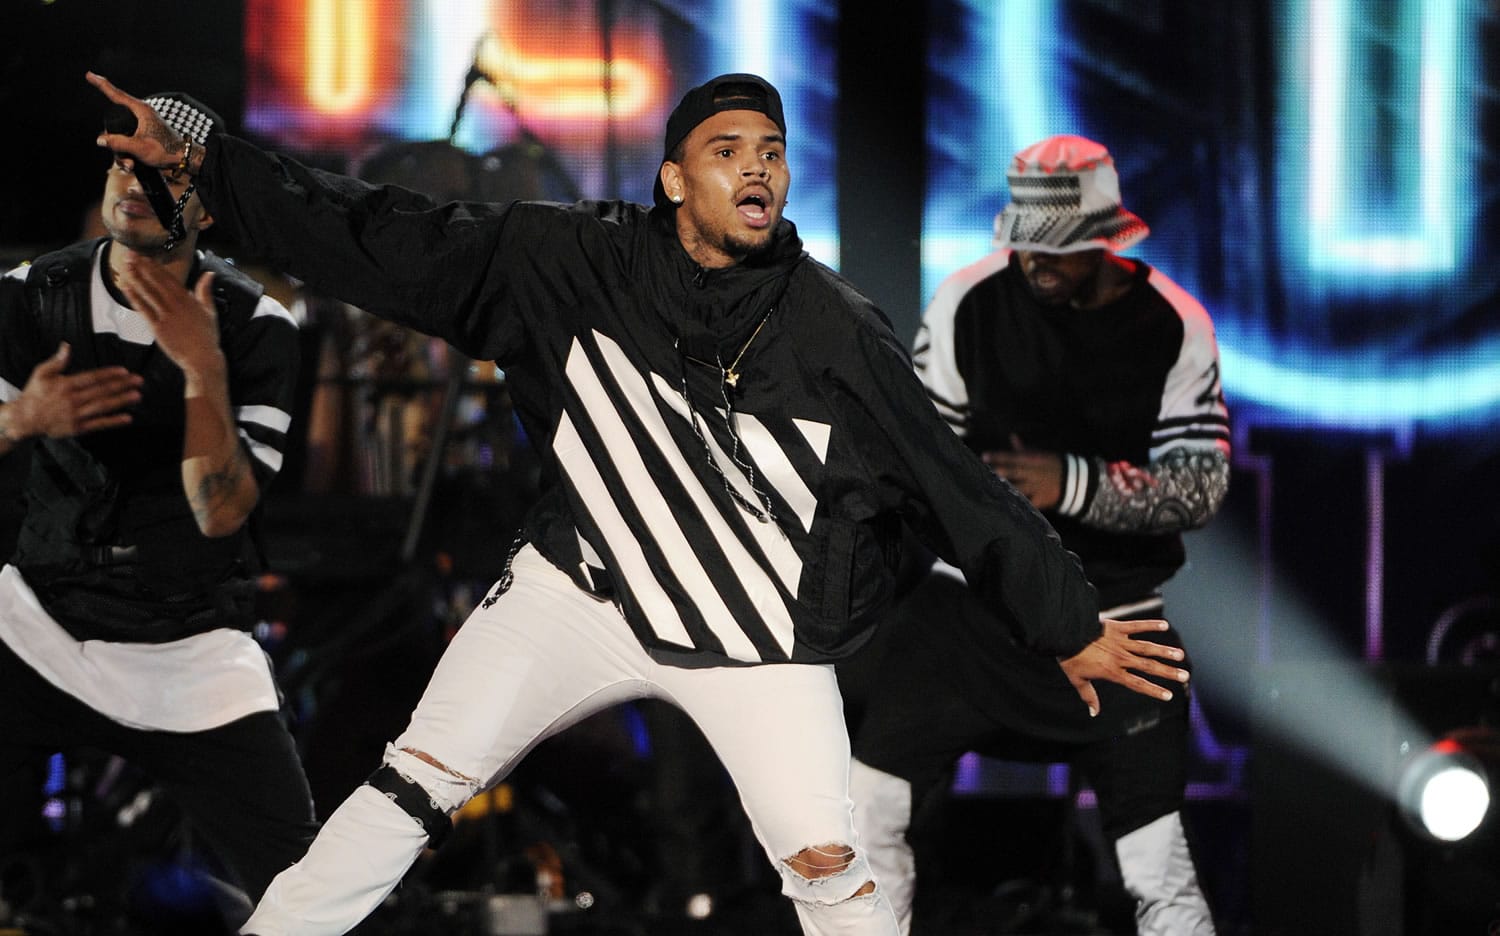 Invision files
Singer Chris Brown's album &quot;X&quot; arrived more than a year after it was originally intended because of a string of legal woes, including a stint in rehab and jail. Instead of bringing listeners into that darkness, he opted for less challenging material.